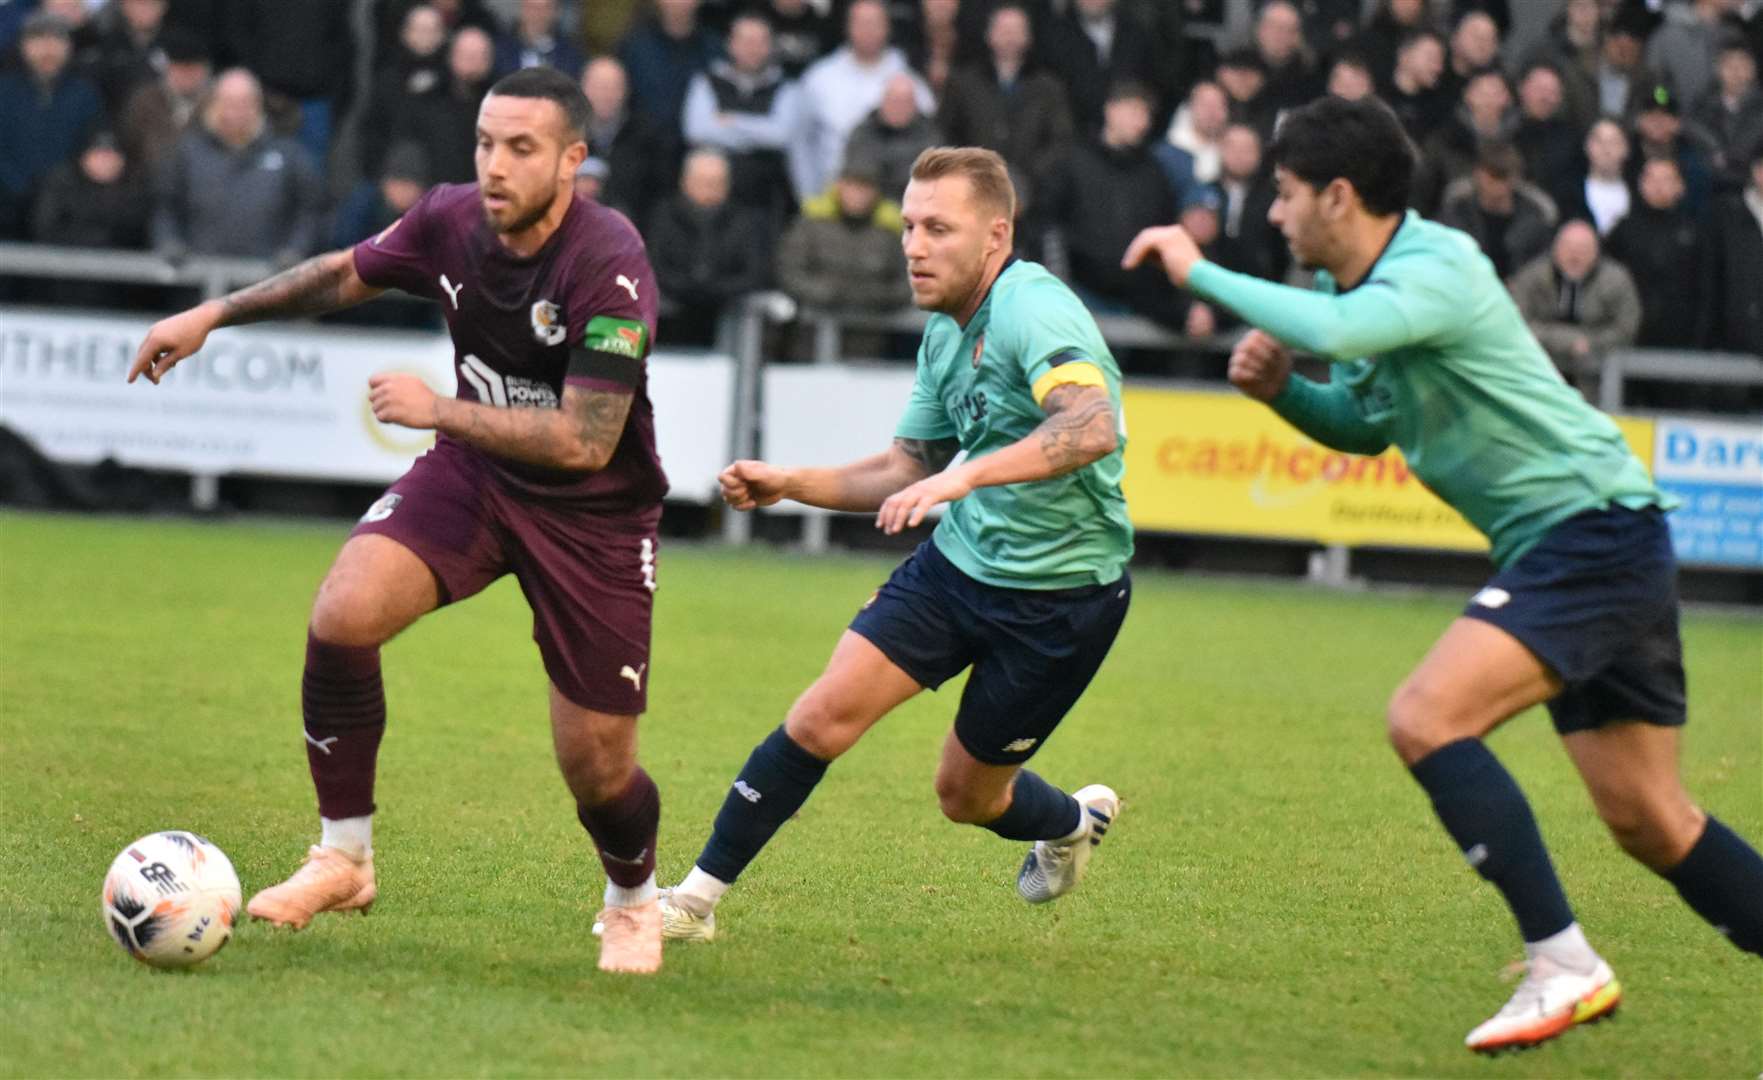 Dartford (purple) humbled local rivals Ebbsfleet for the second time in six days, winning 4-0 on January 1. Picture: Ed Miller/EUFC